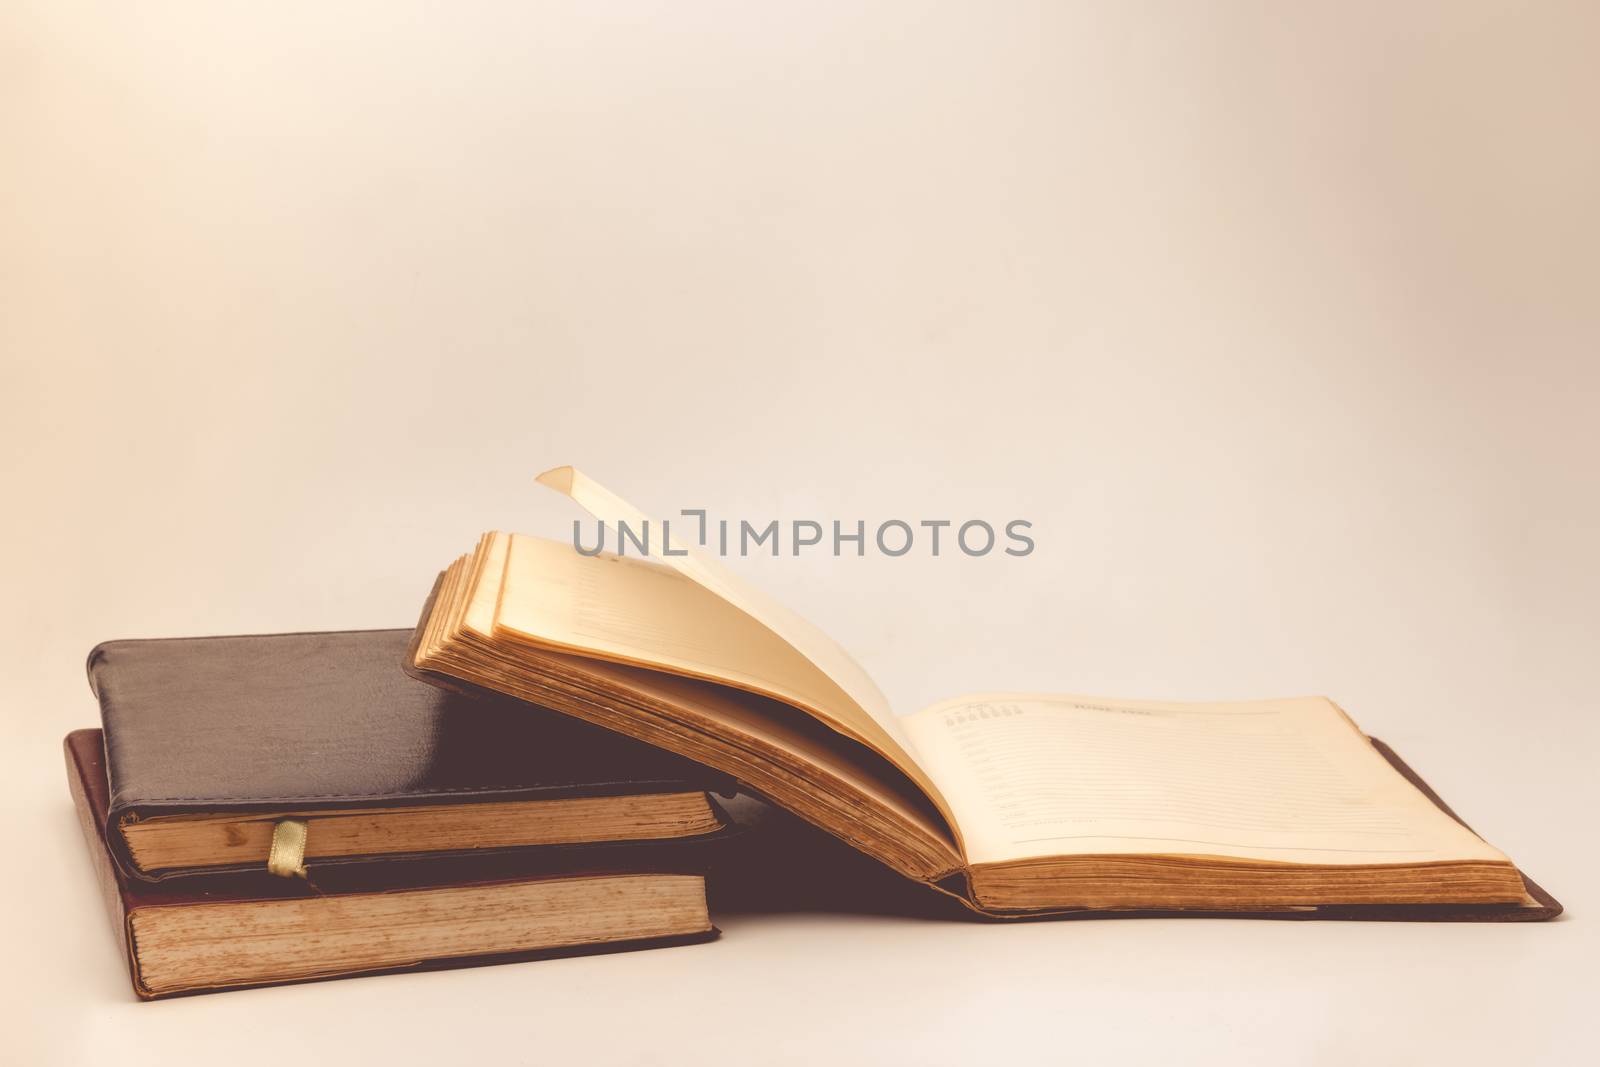 A stack of old books with vintage background. by ronnarong